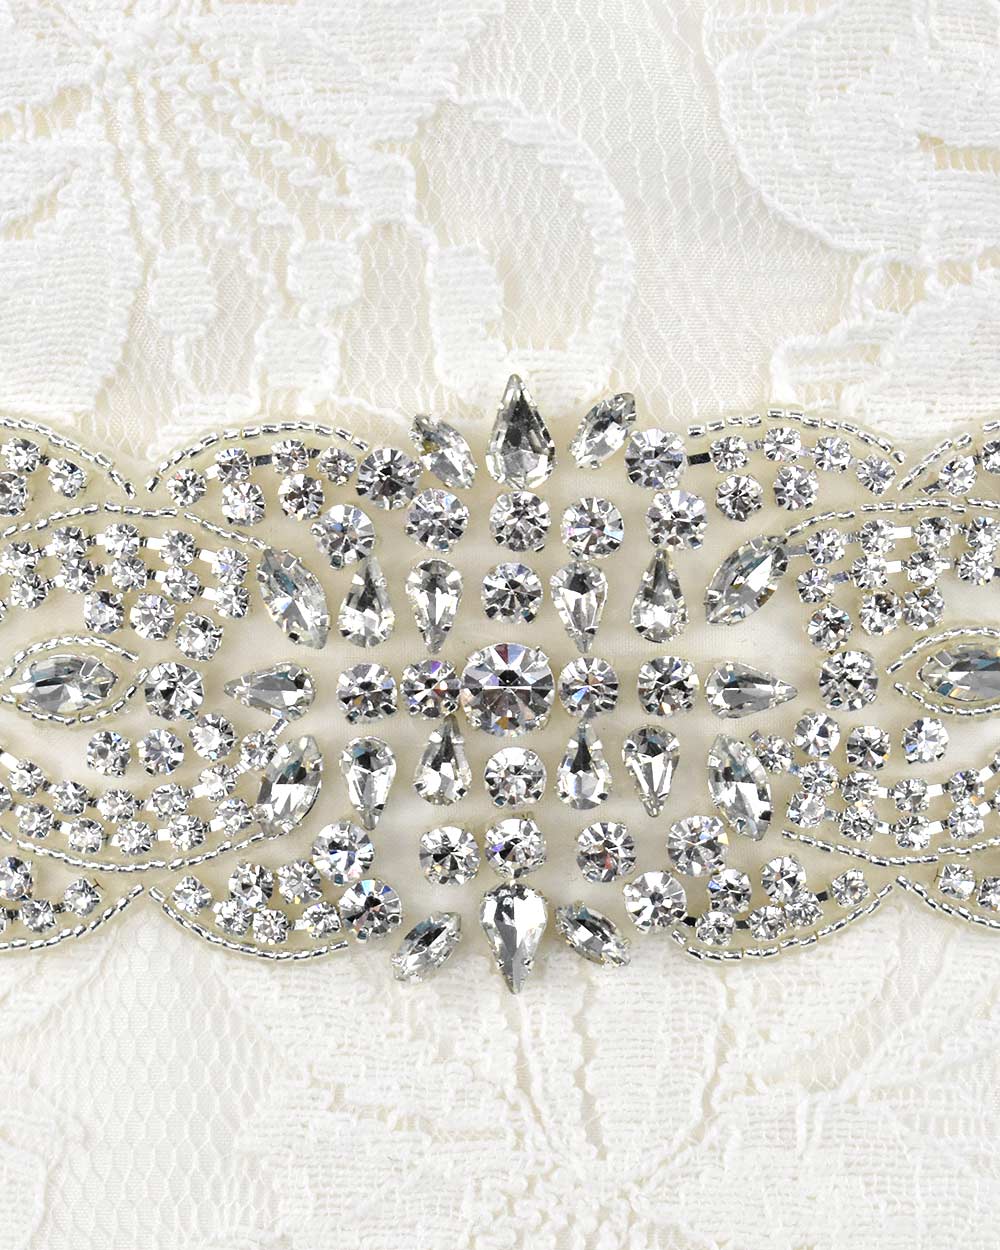 This wedding belt is bound to make a statement and give the wow factor to your dress. This diamante wide belt is adorned with stunning rhinestone diamantes and beading detail. Displayed on an 66" organza ribbon to easily tie around your waist. Adding luscious sparkle to any wedding dress.